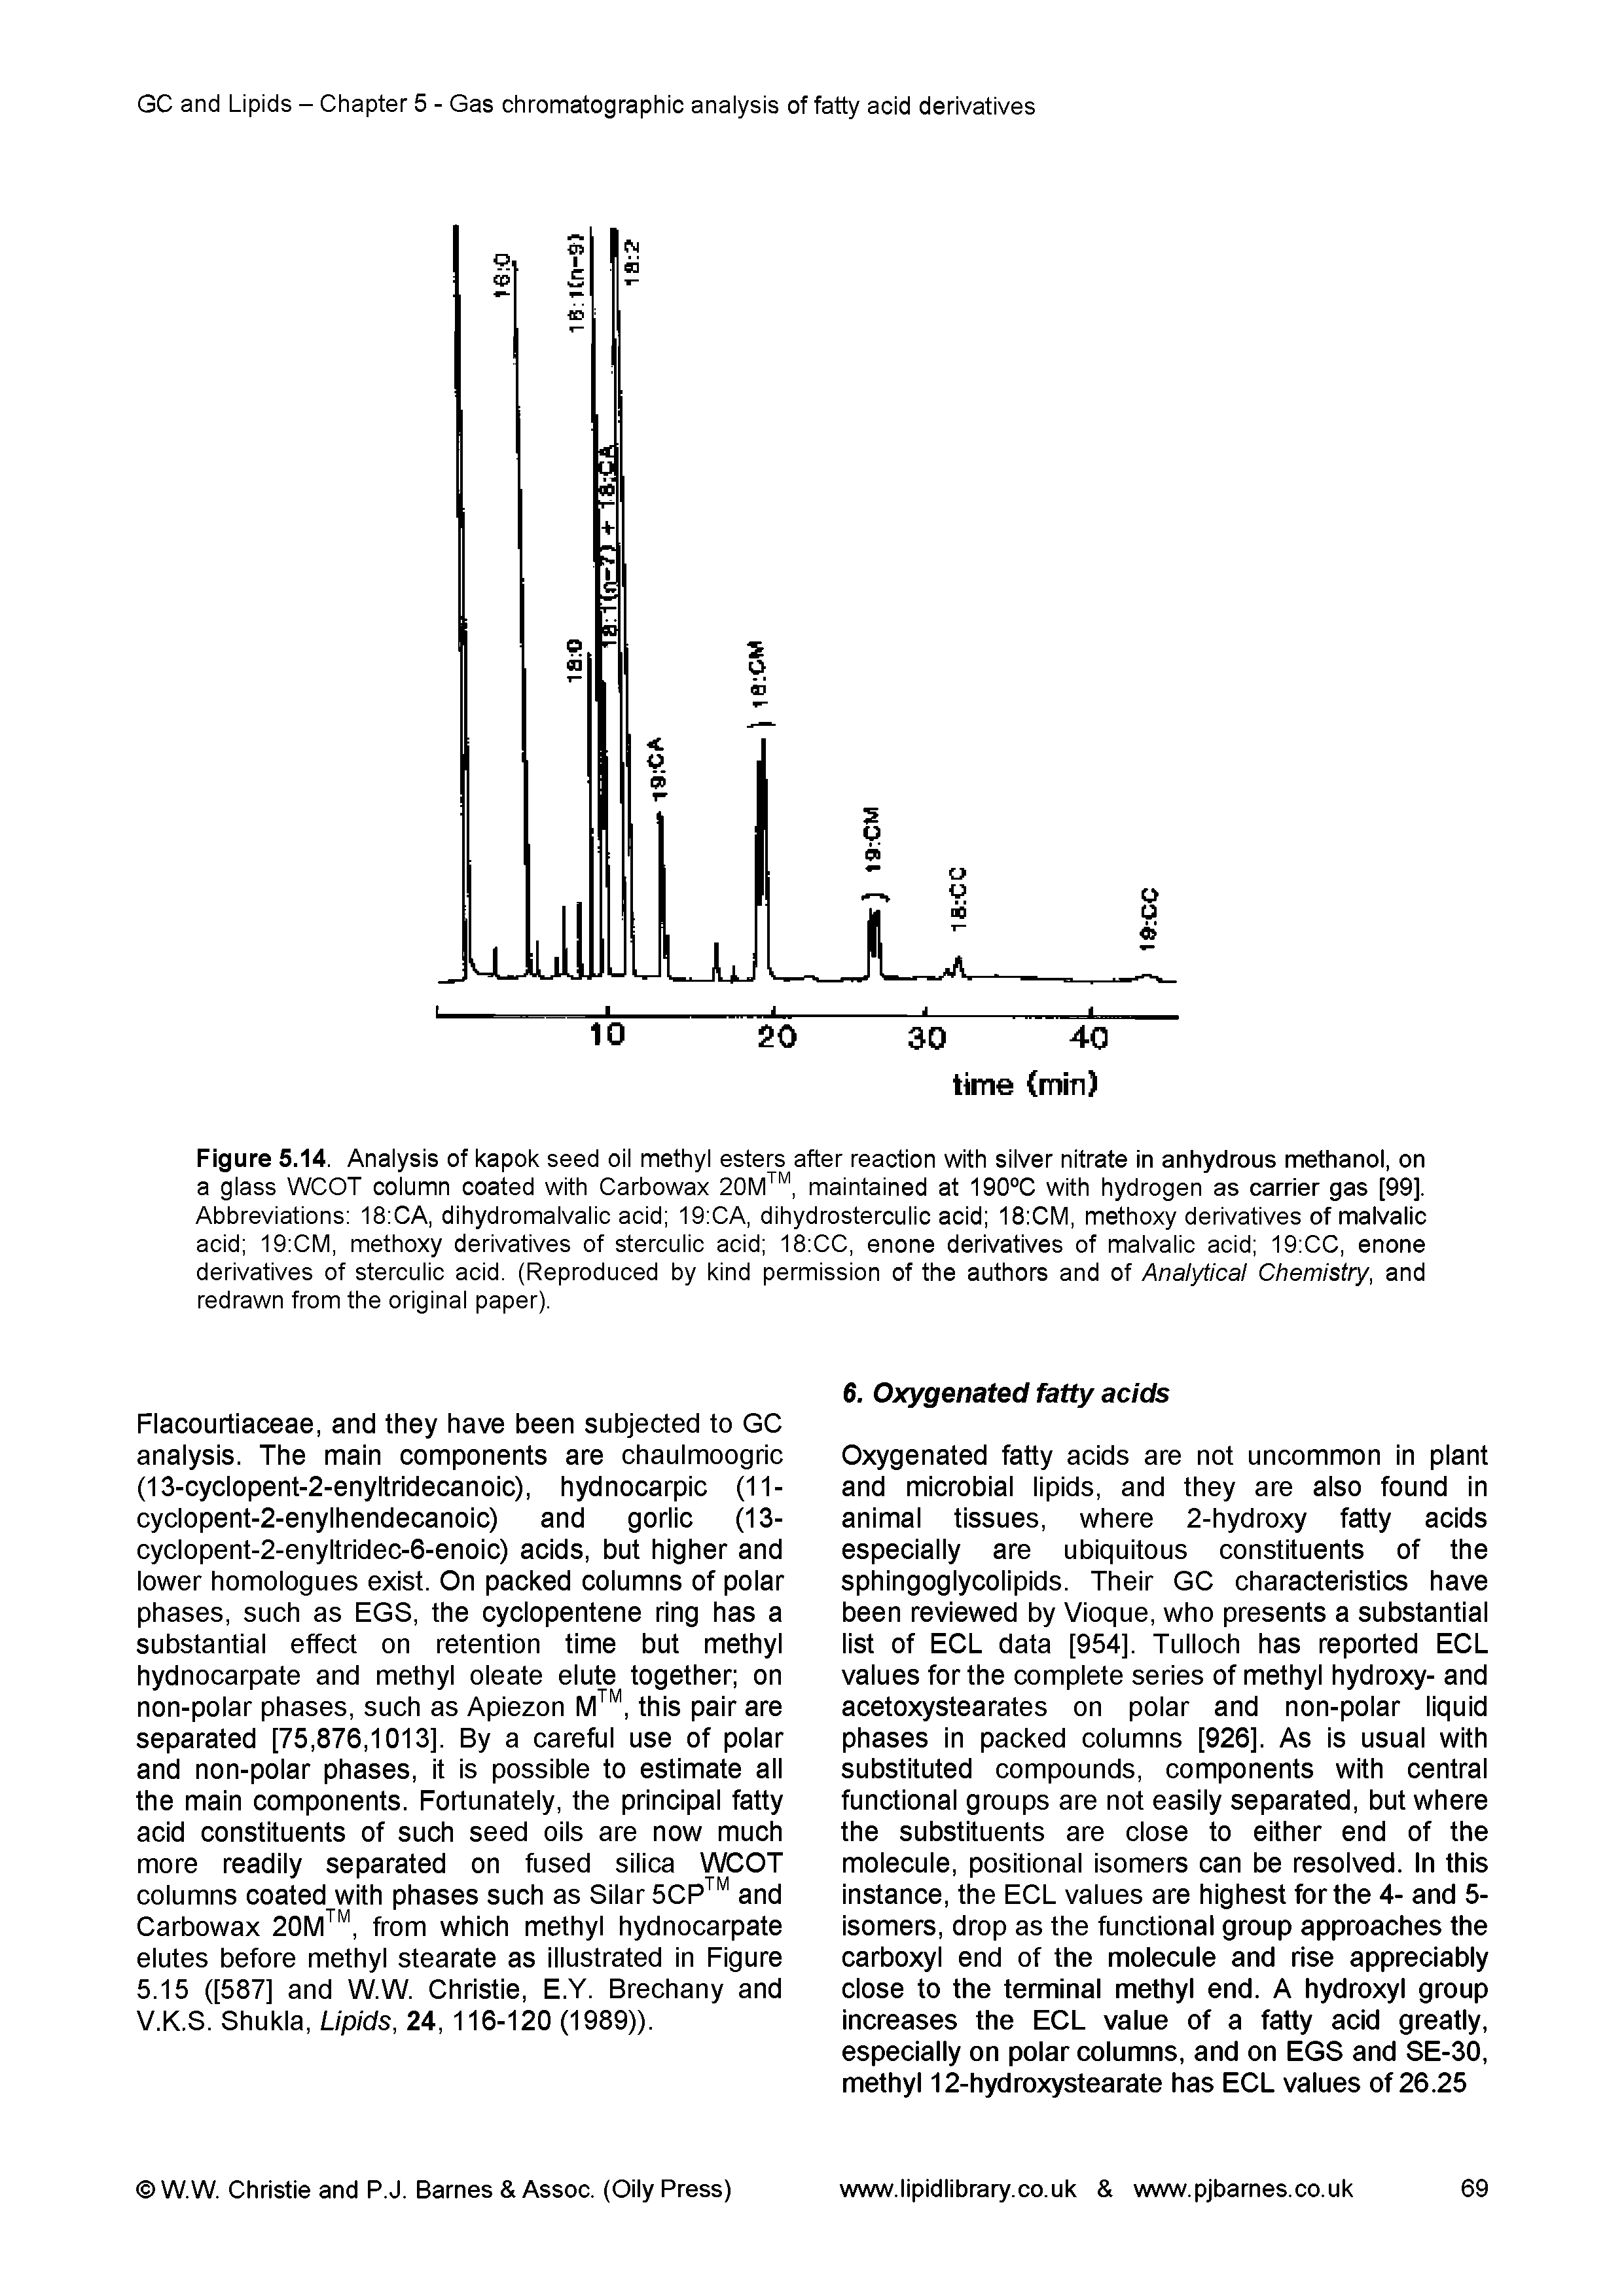 Figure 5.14. Analysis of kapok seed oil methyl esters after reaction with silver nitrate in anhydrous methanol, on a glass WCOT column coated with Carbowax 20M, maintained at 190°C with hydrogen as carrier gas [99]. Abbreviations 18 CA, dihydromalvalic acid 19 CA, dihydrosterculic acid 18 CM, methoxy derivatives of malvalic acid 19 CM, methoxy derivatives of sterculic acid 18 CC, enone derivatives of malvalic acid 19 CC, enone derivatives of sterculic acid. (Reproduced by kind permission of the authors and of Analytical Chemistry, and redrawn from the original paper).